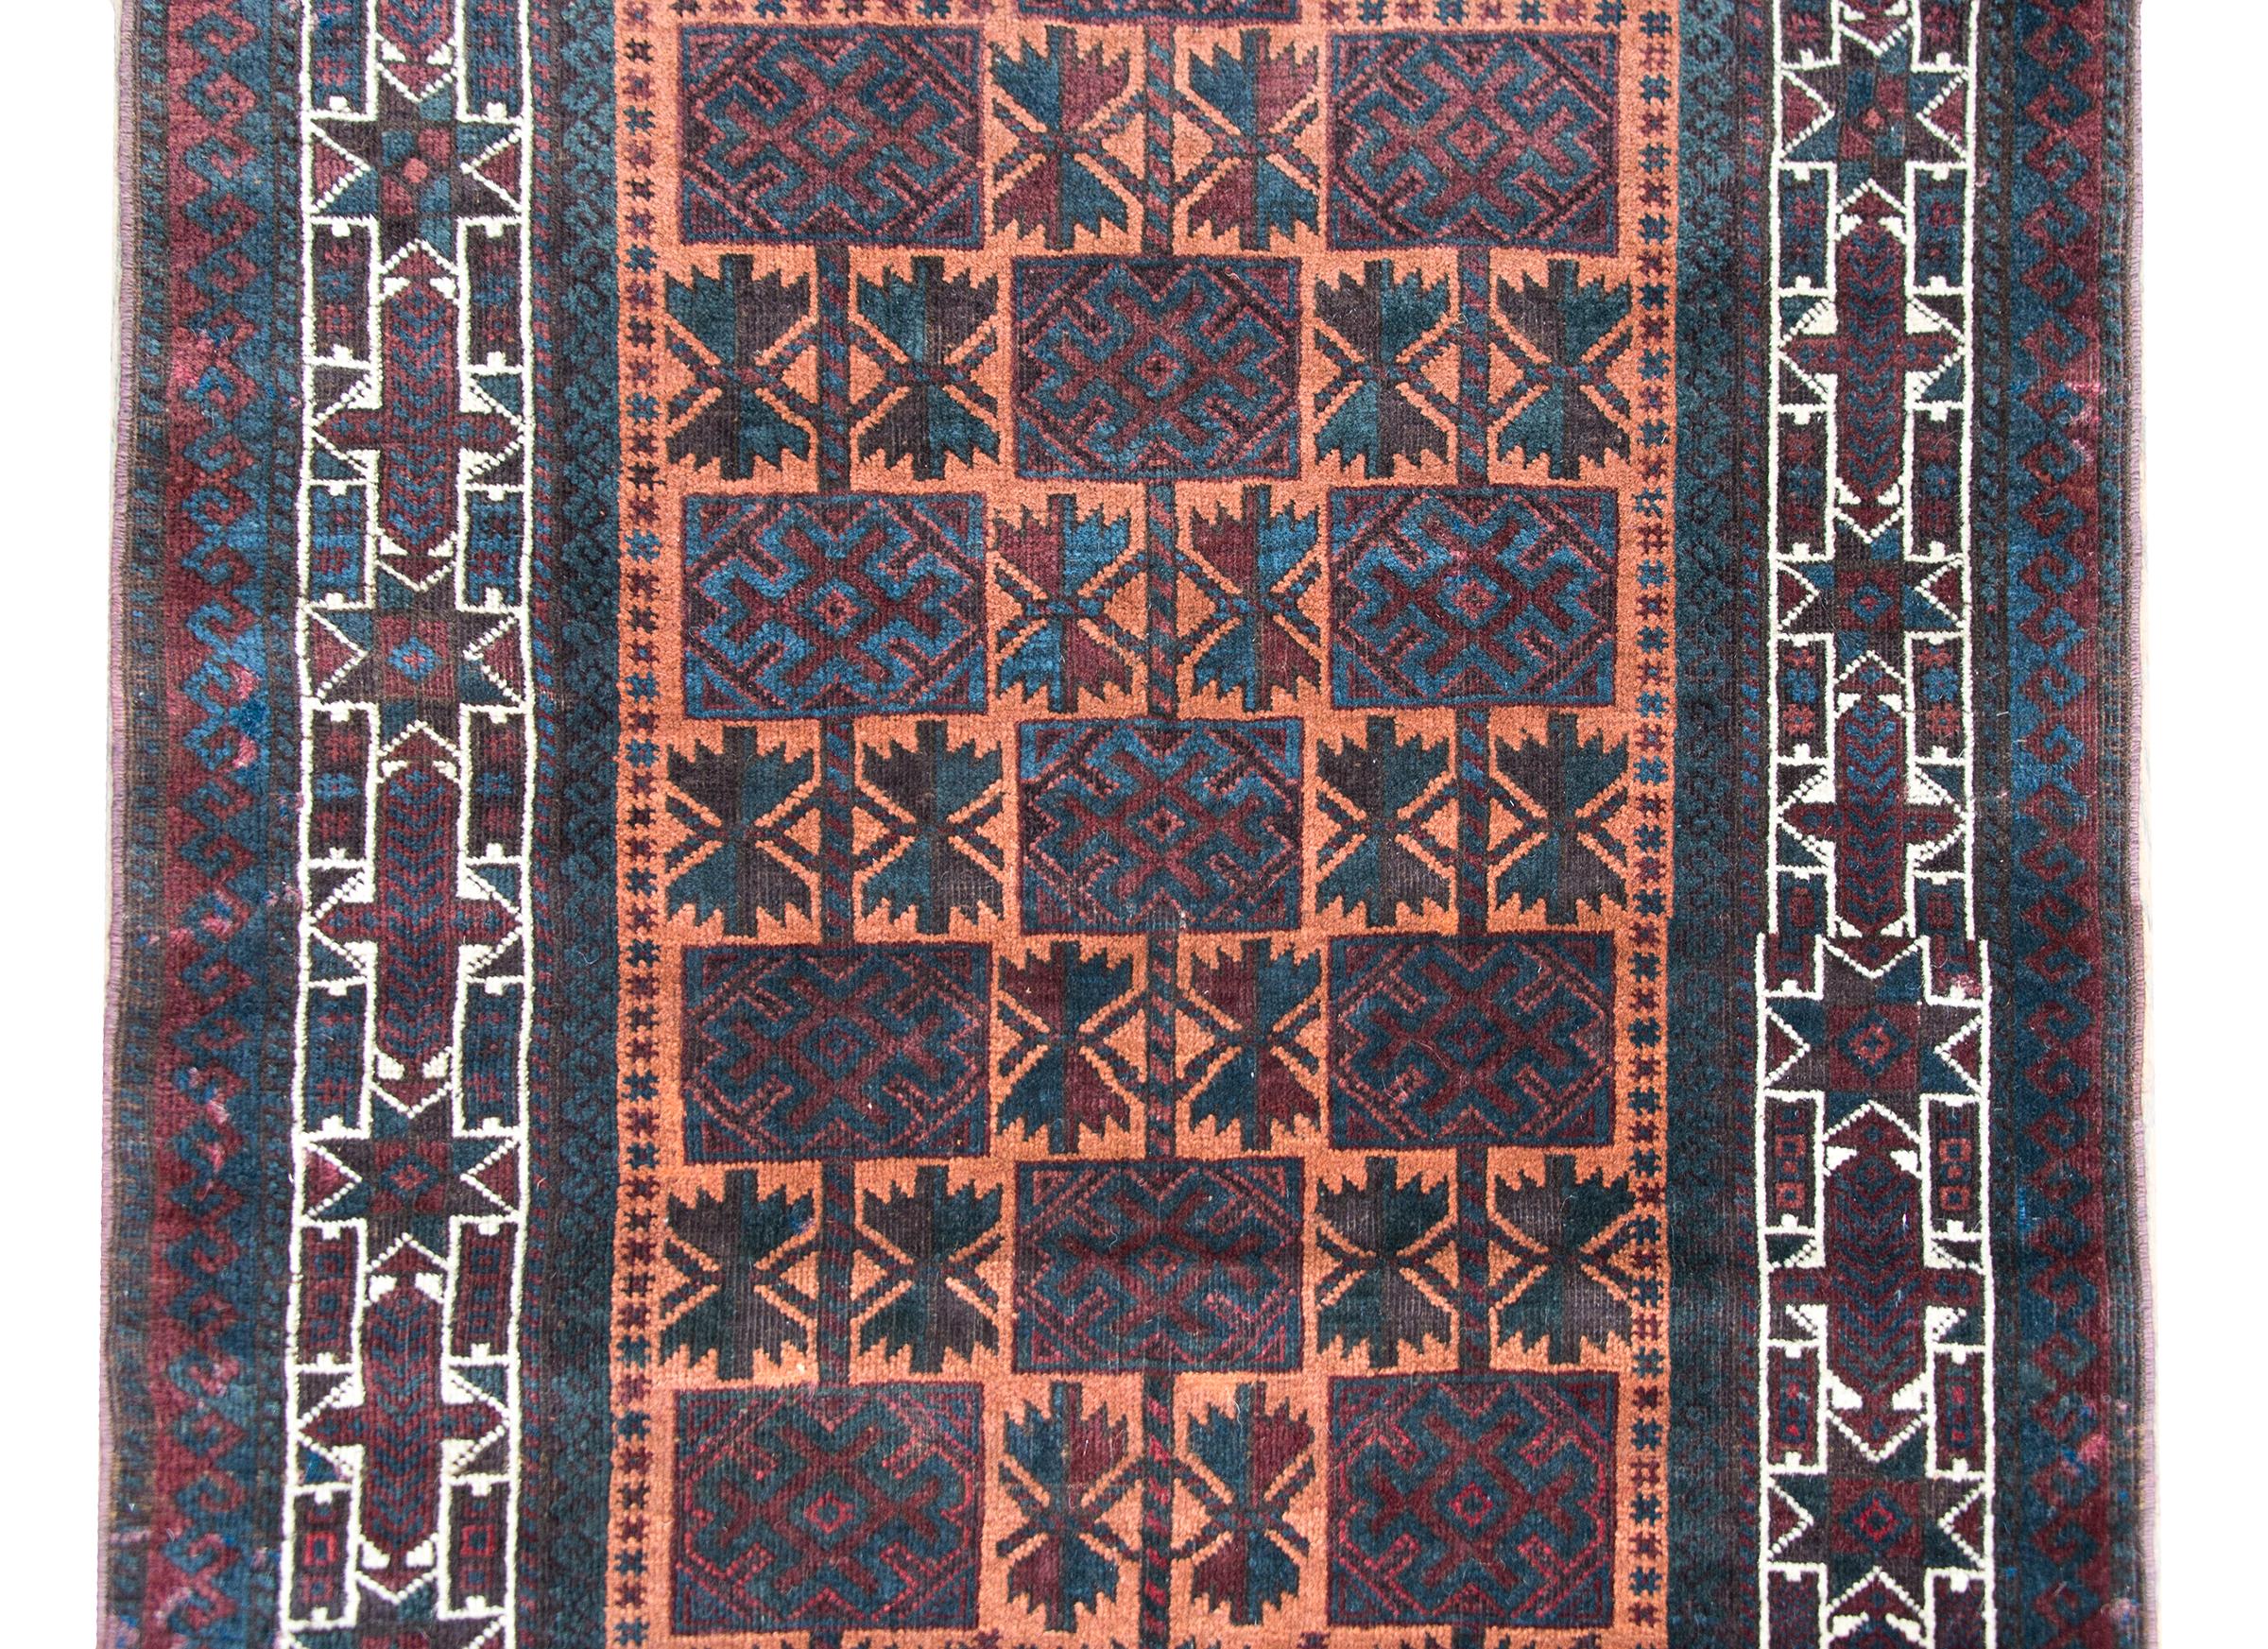 A wonderful mid-20th century Afghani prayer rug with a beautiful all-over stylized floral pattern arranged into a grid, and surrounded by even more stylized flowers, and all woven in muted reds, indigos, oranges, and white wool.